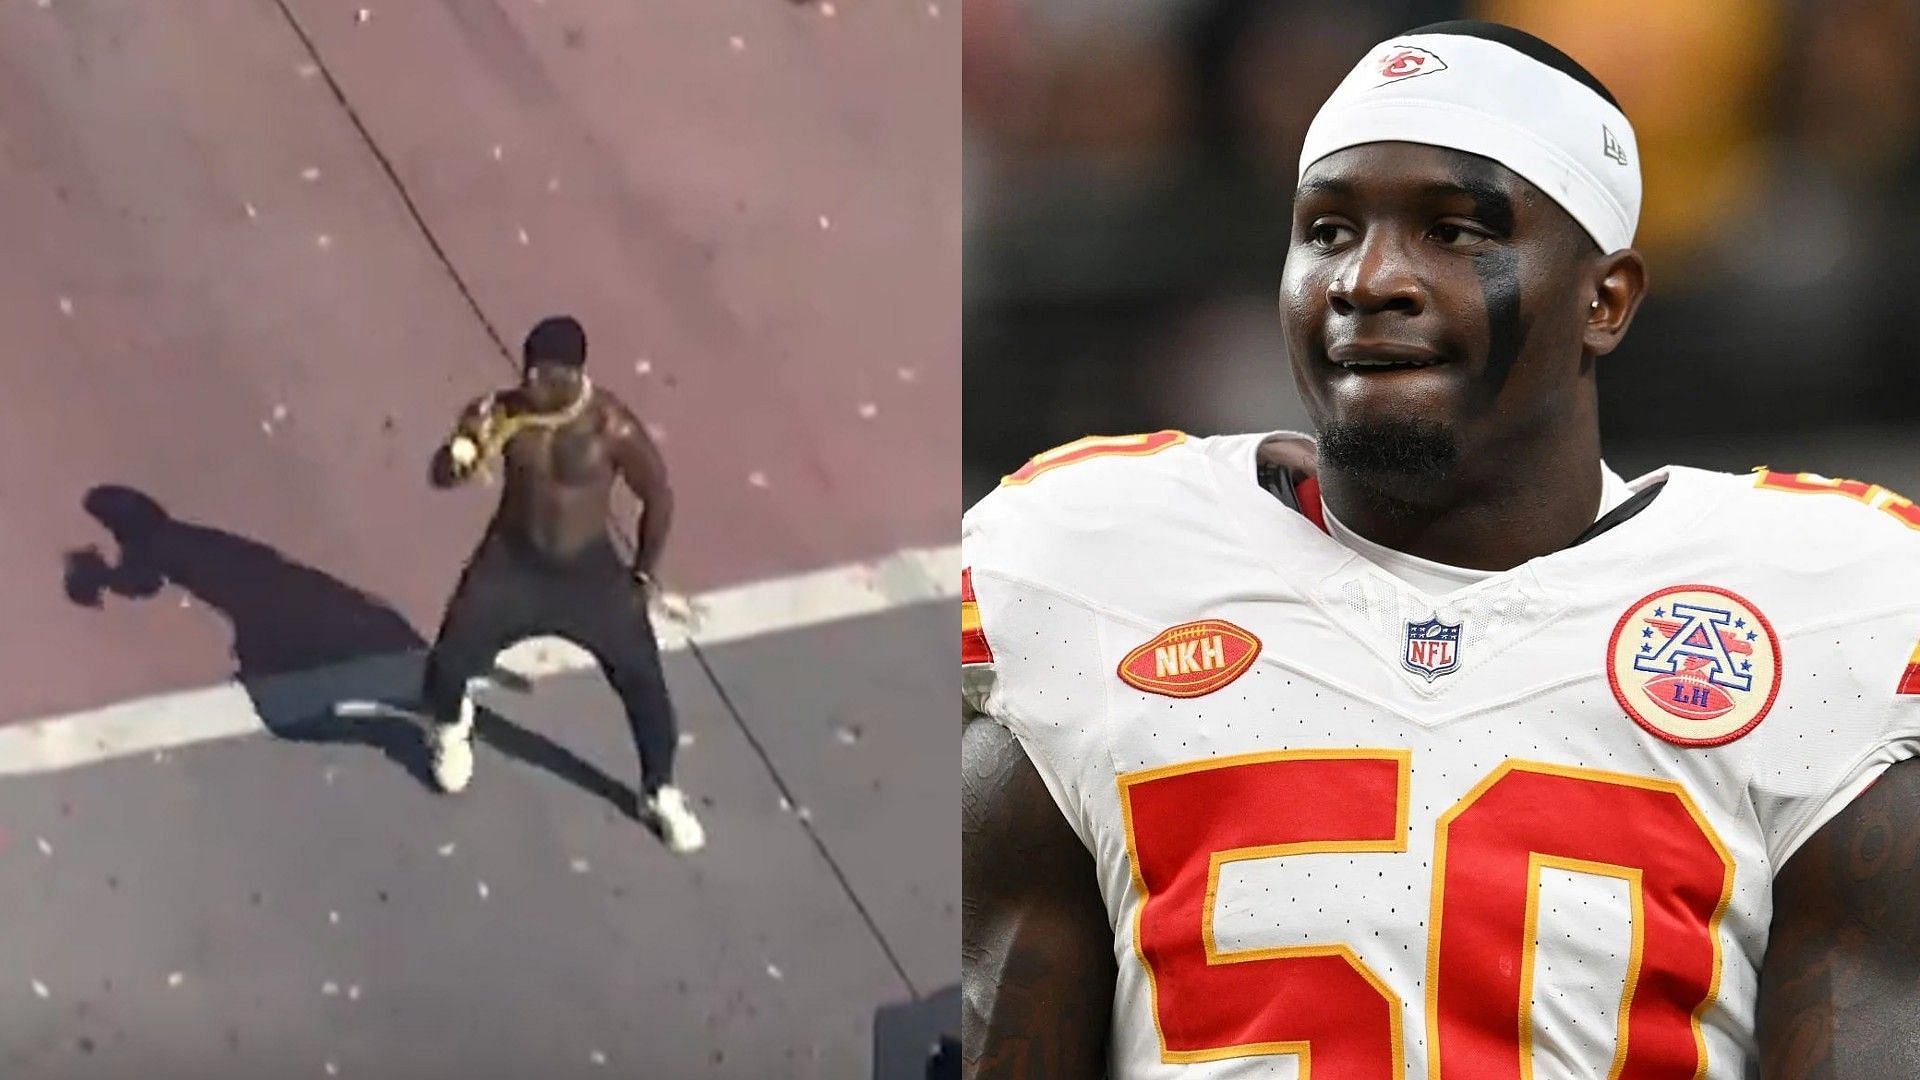 WATCH: Willie Gay runs shirtless on streets during Kansas City Chiefs&rsquo; Super Bowl parade